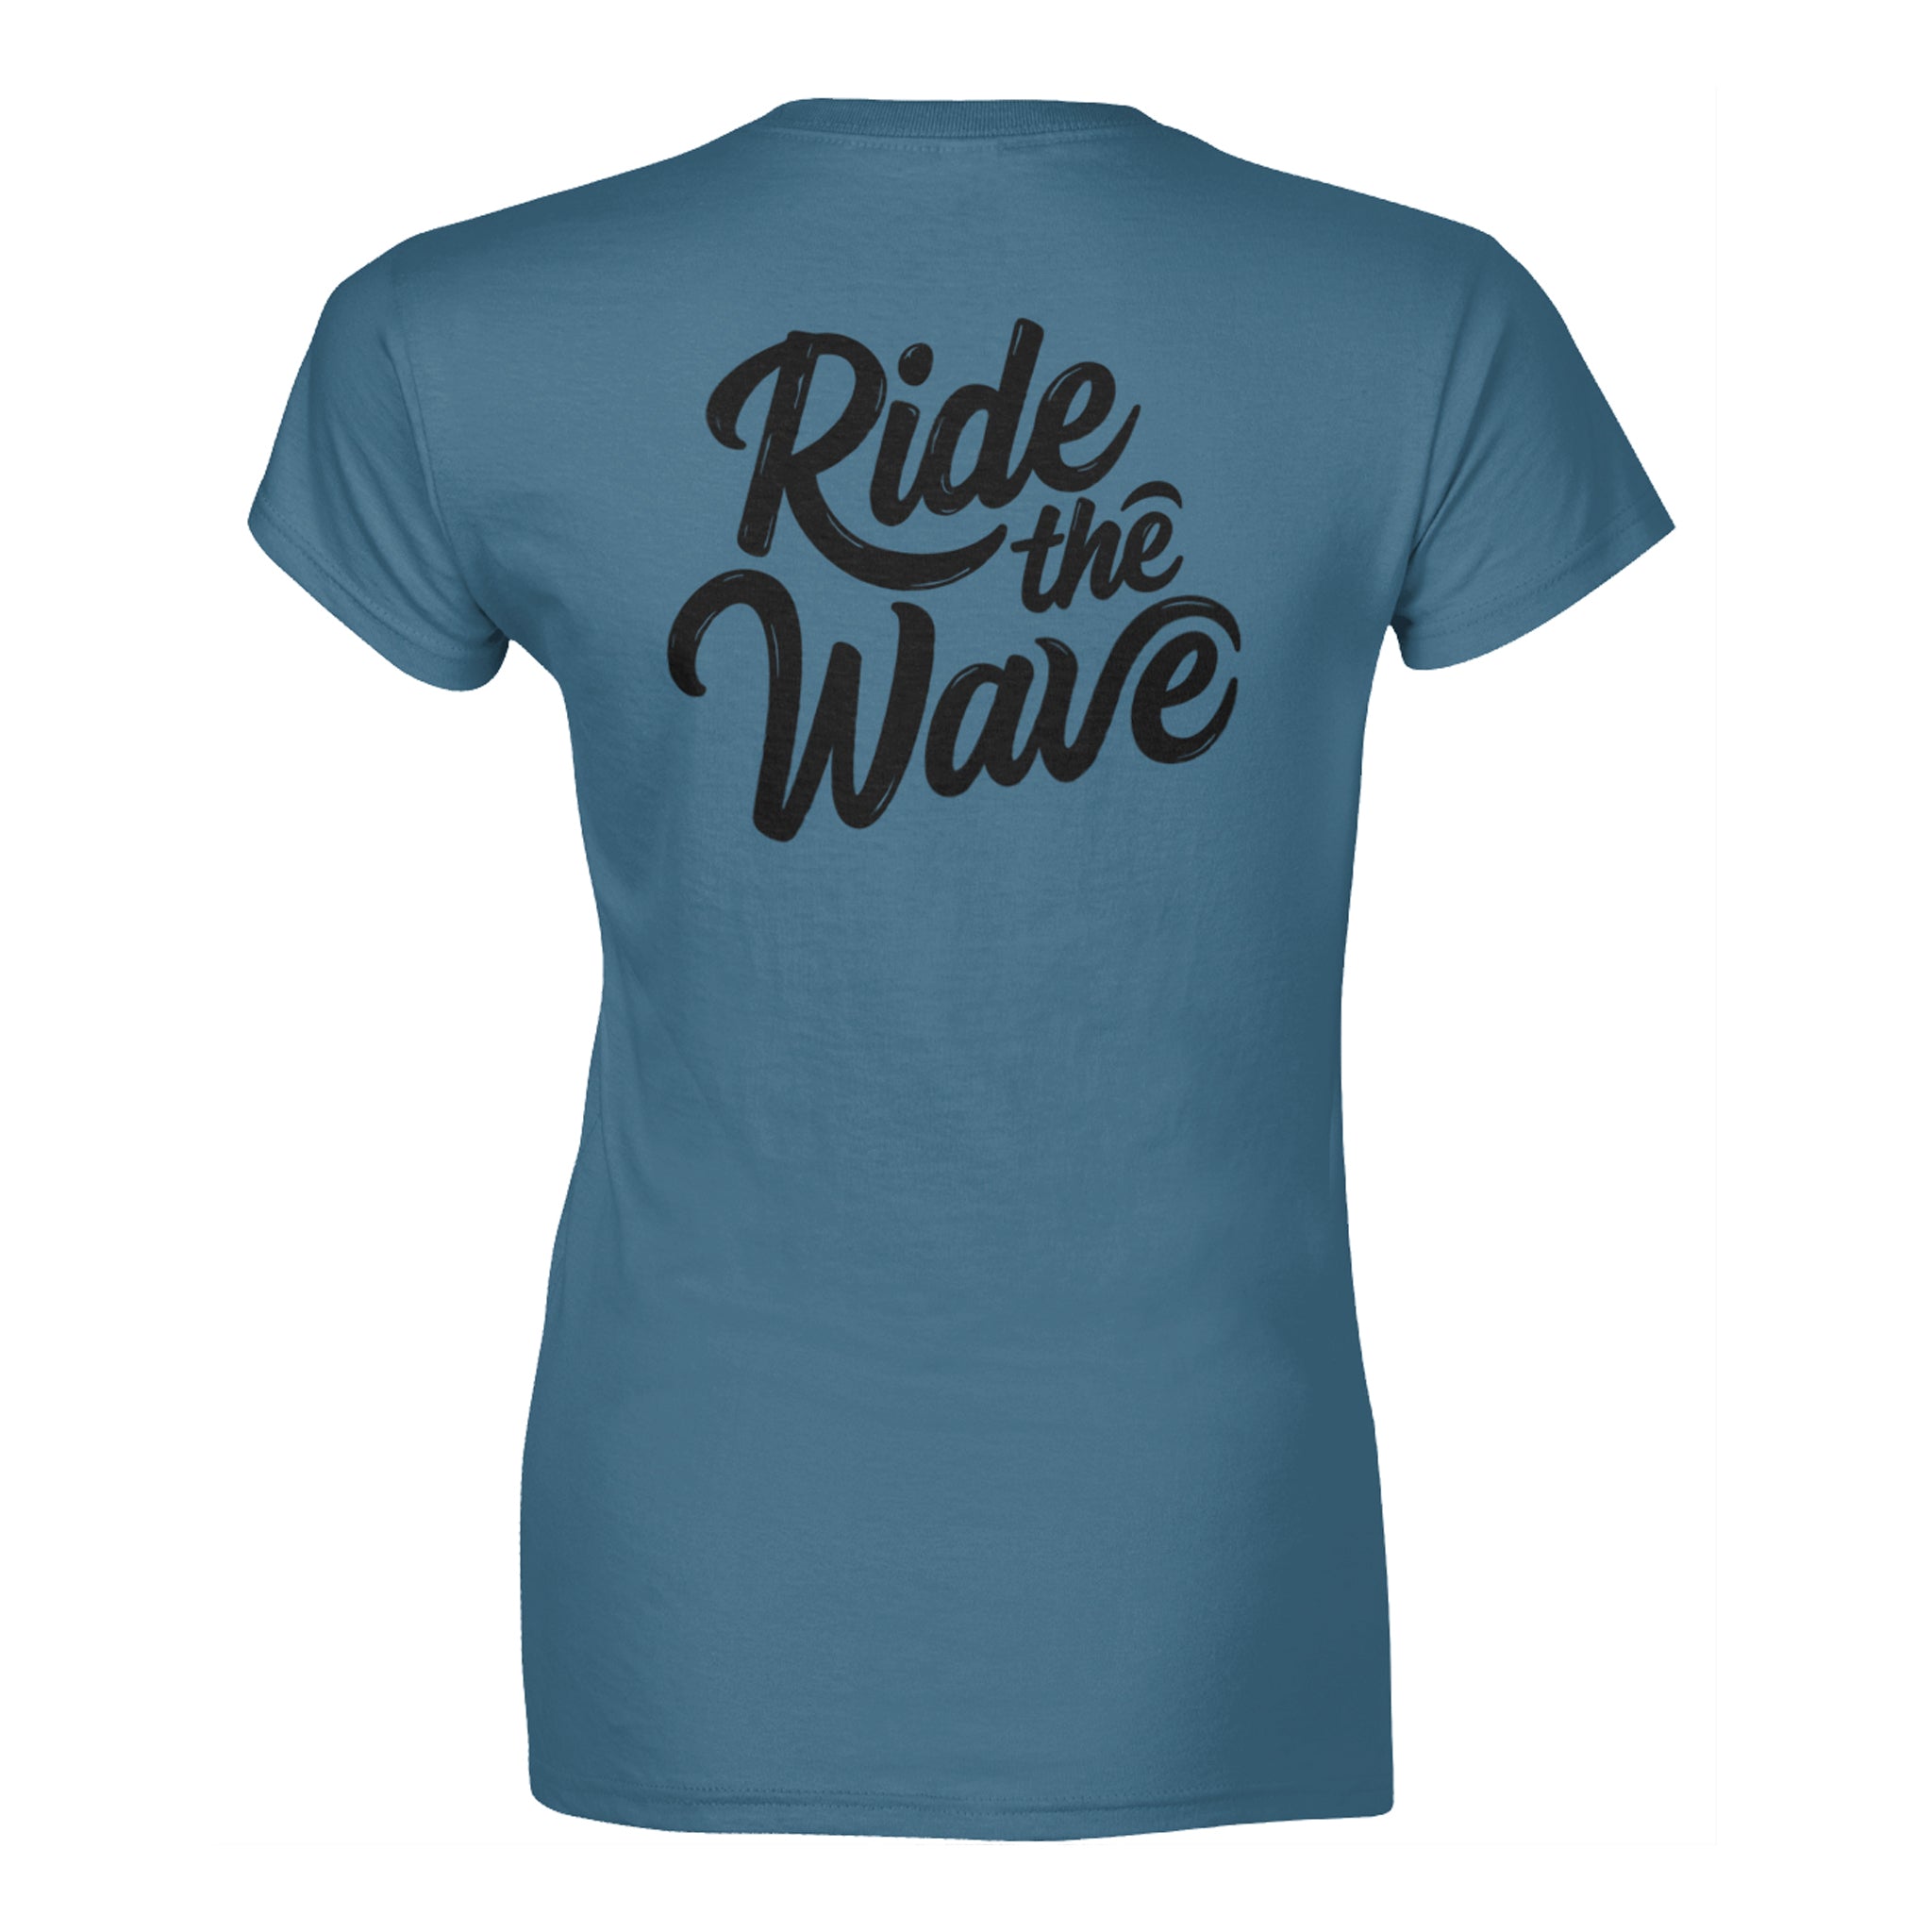 'Ride the Wave' Womens T-Shirt